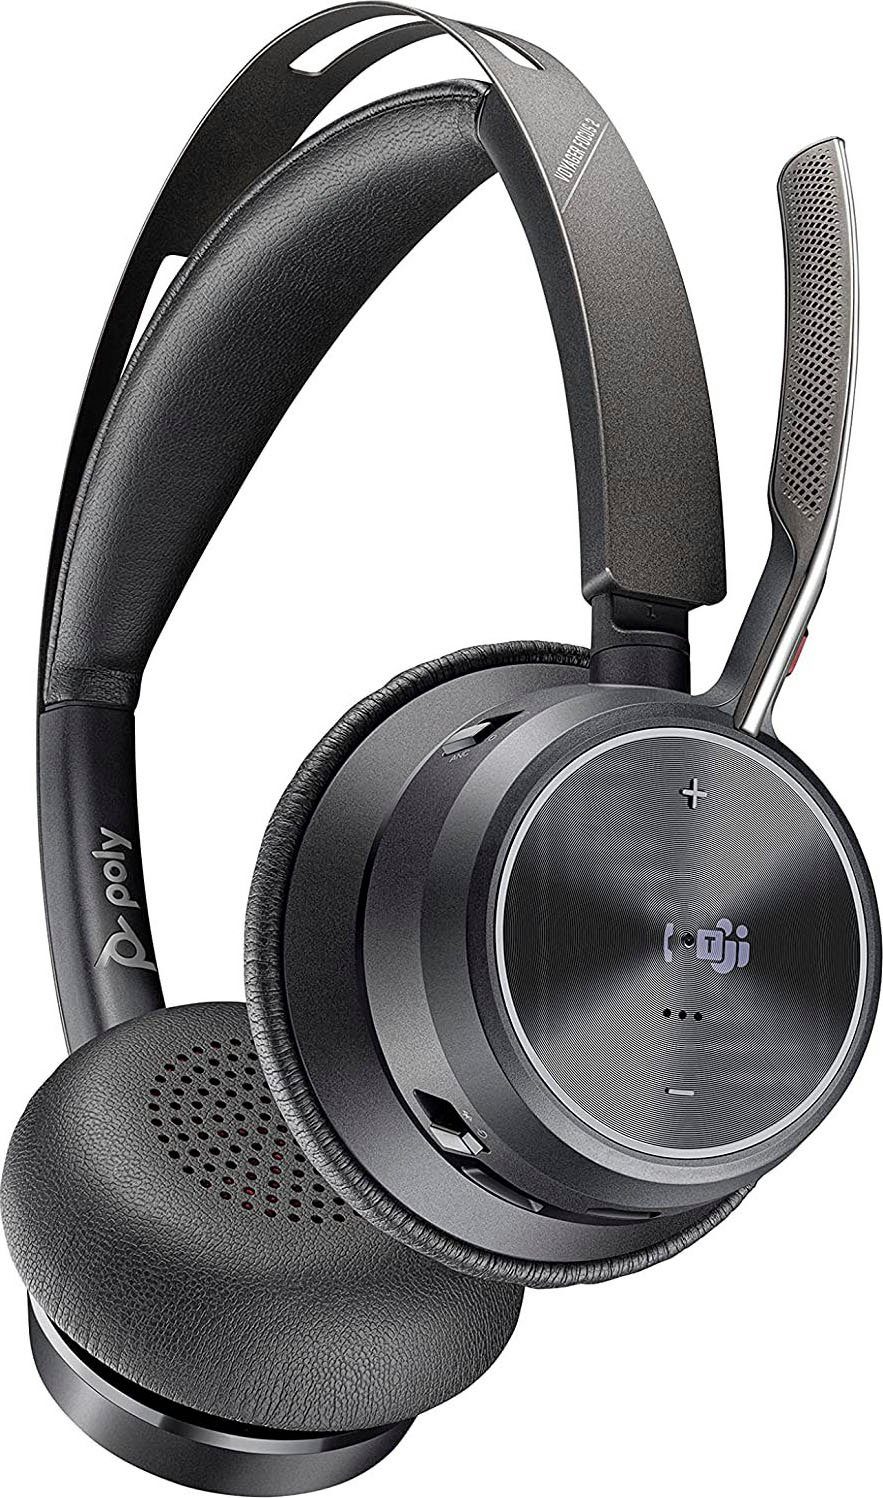 UC Poly Wireless-Headset (Noise-Cancelling, Bluetooth) Voyager Focus